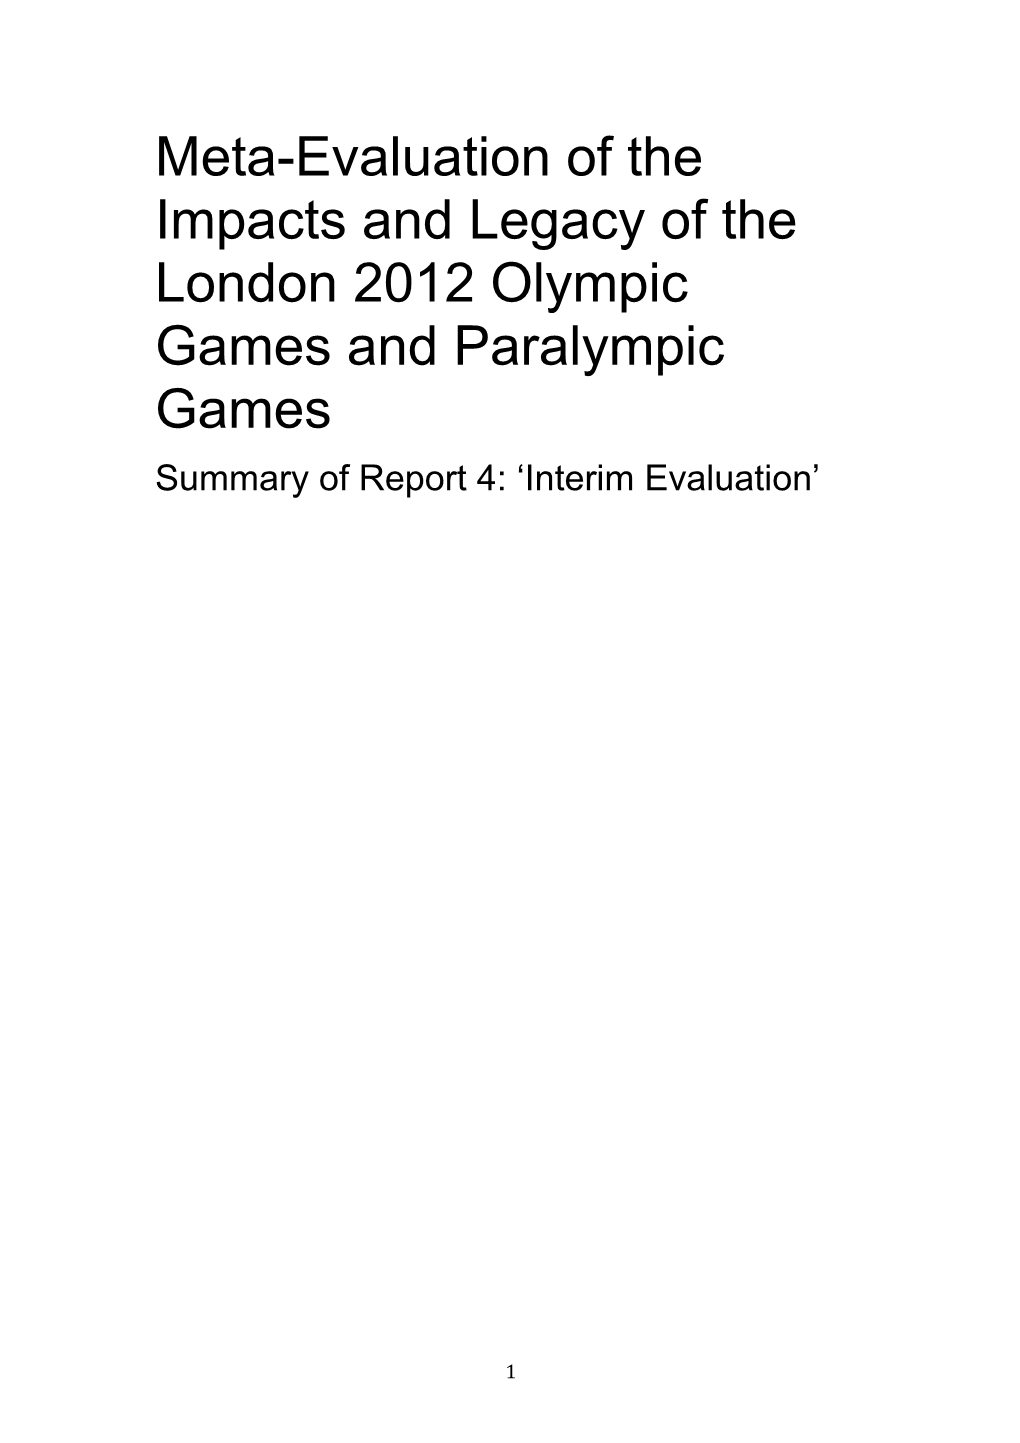 Meta-Evaluation of the Impacts and Legacy of the London 2012 Olympic Games and Paralympic Games